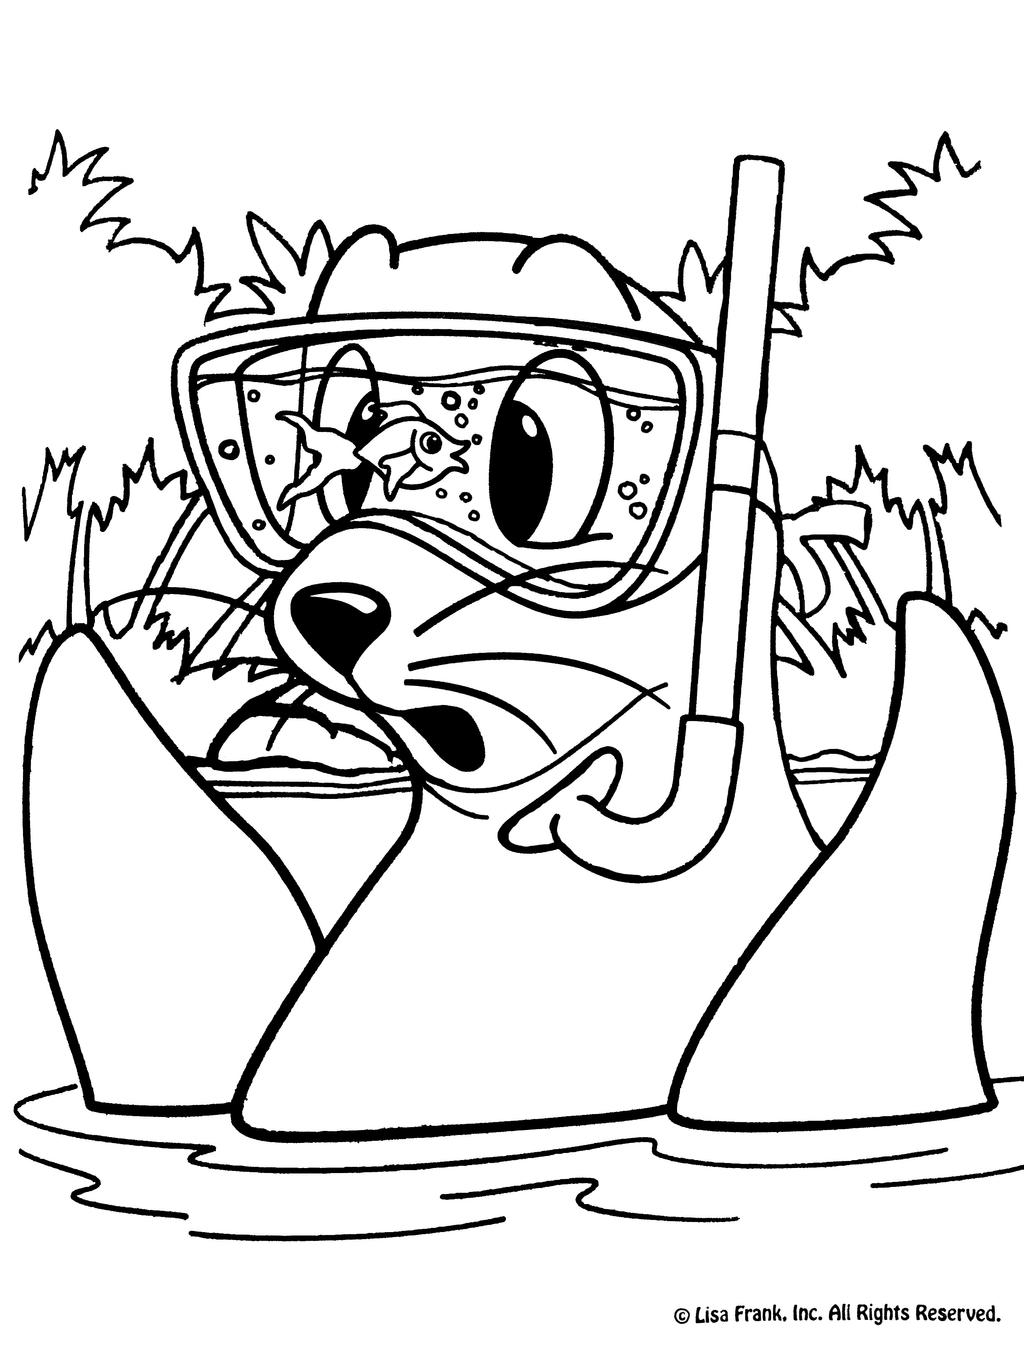 Lisa Frank Coloring Page by TallyBaby13 on DeviantArt